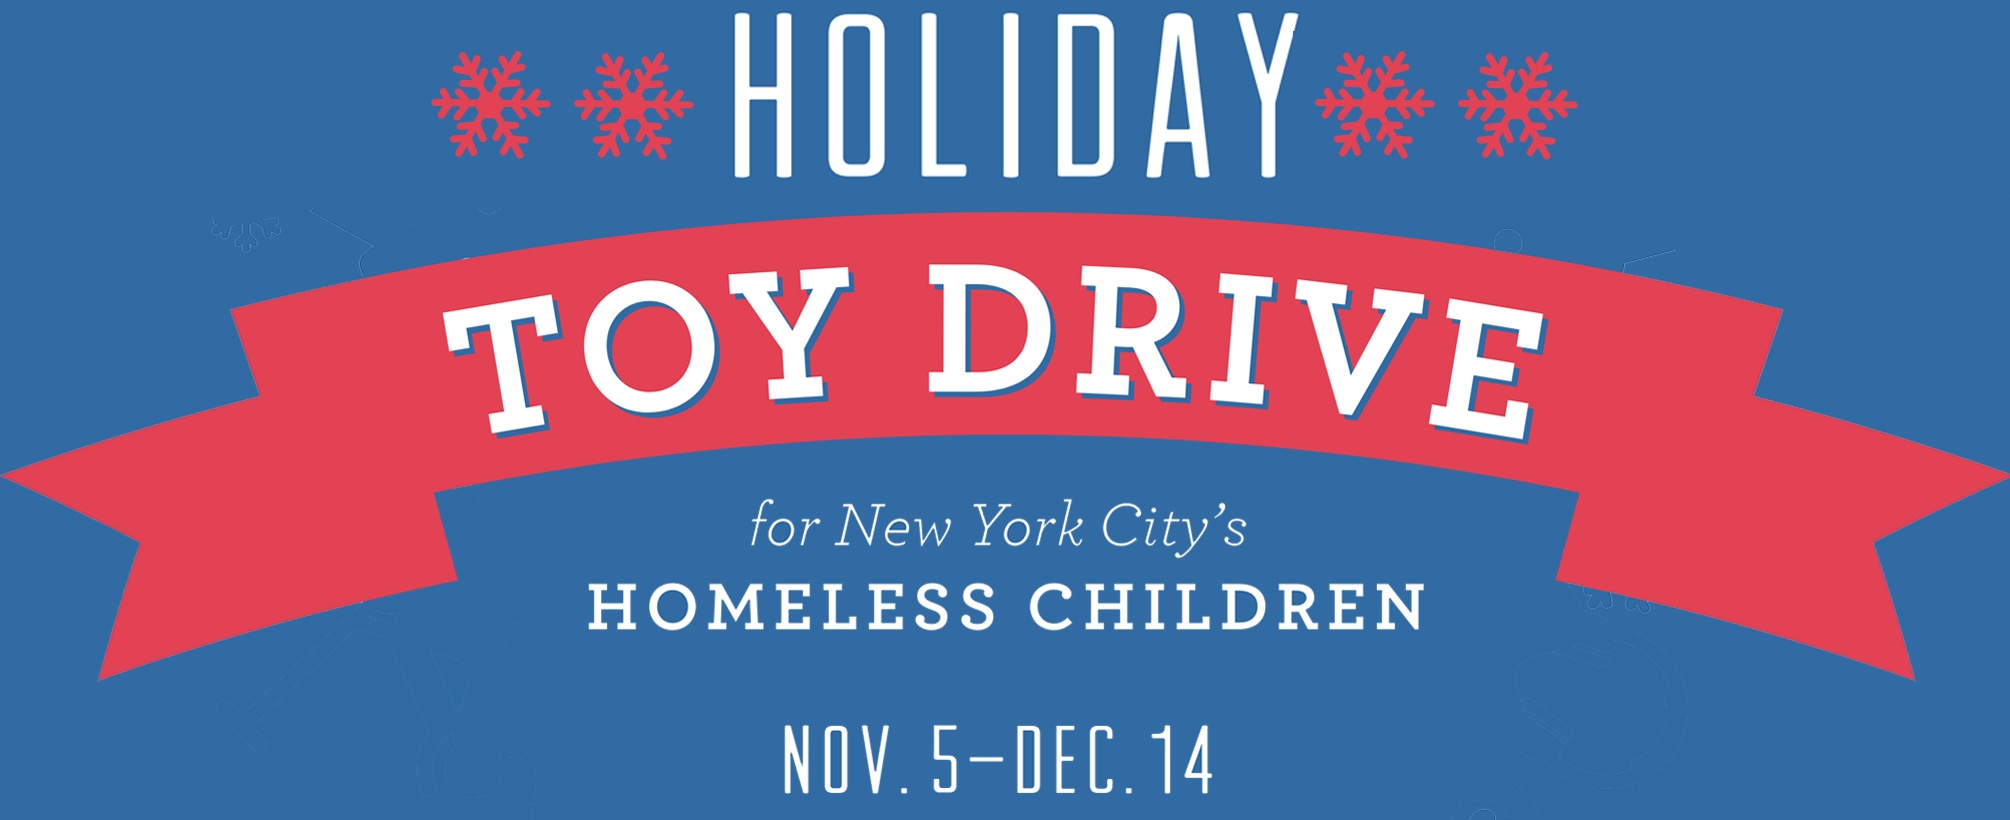 GRAPHIC: 2018 Holiday Toy Drive for Homeless Children Nov 5- Dec 14